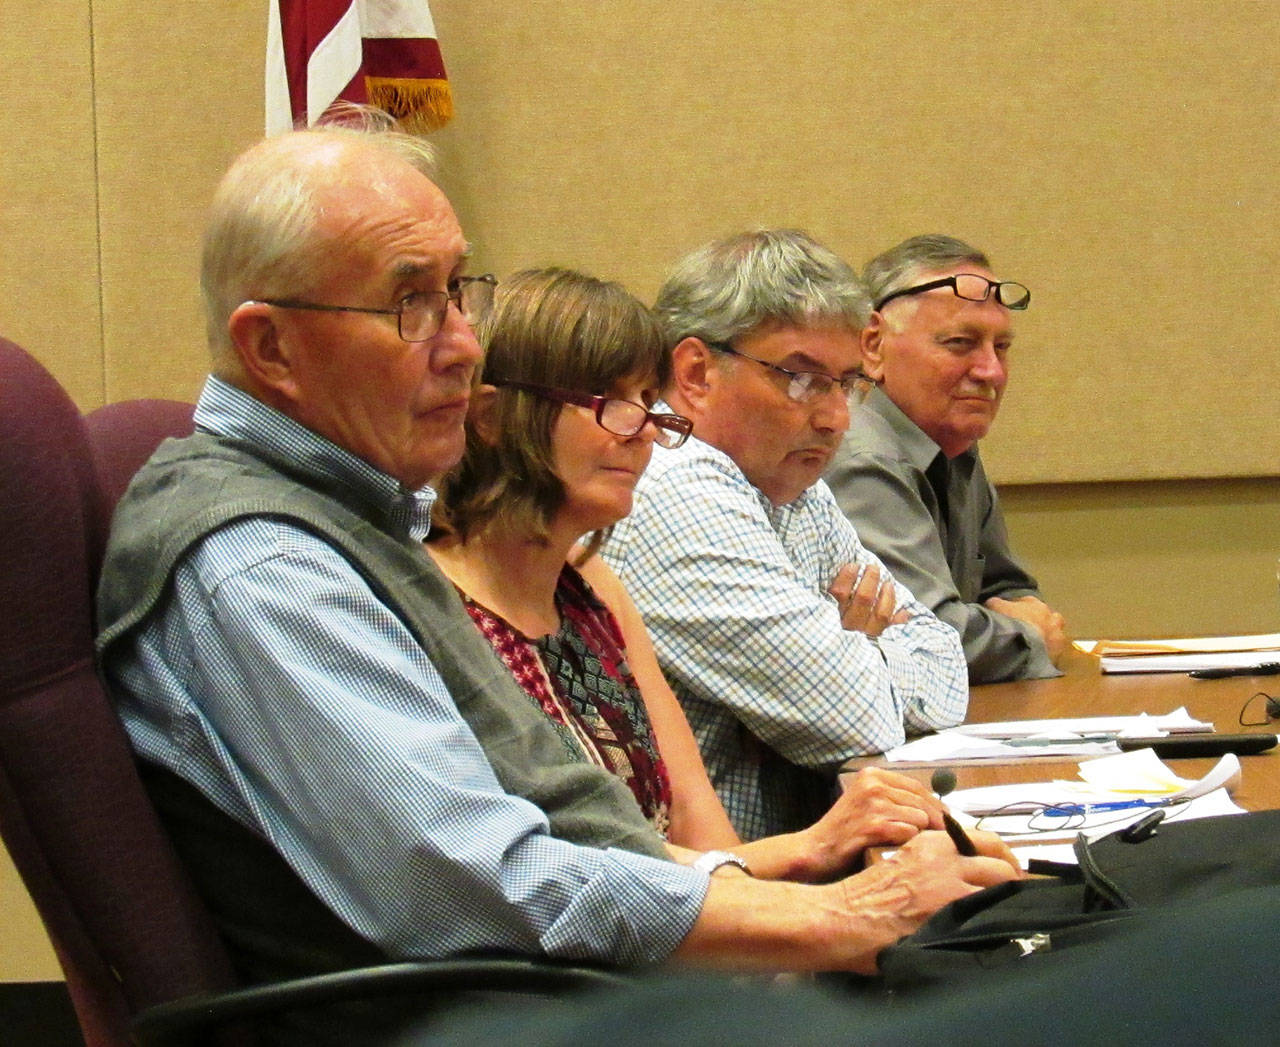 Scott Johnston photo: John Lynn, Lisa Griebel, Jon Martin and Gordon Broadbent of the Ocean Shores City Council listen to a presentation on Block Watch during the Aug. 21 study session on public safety.